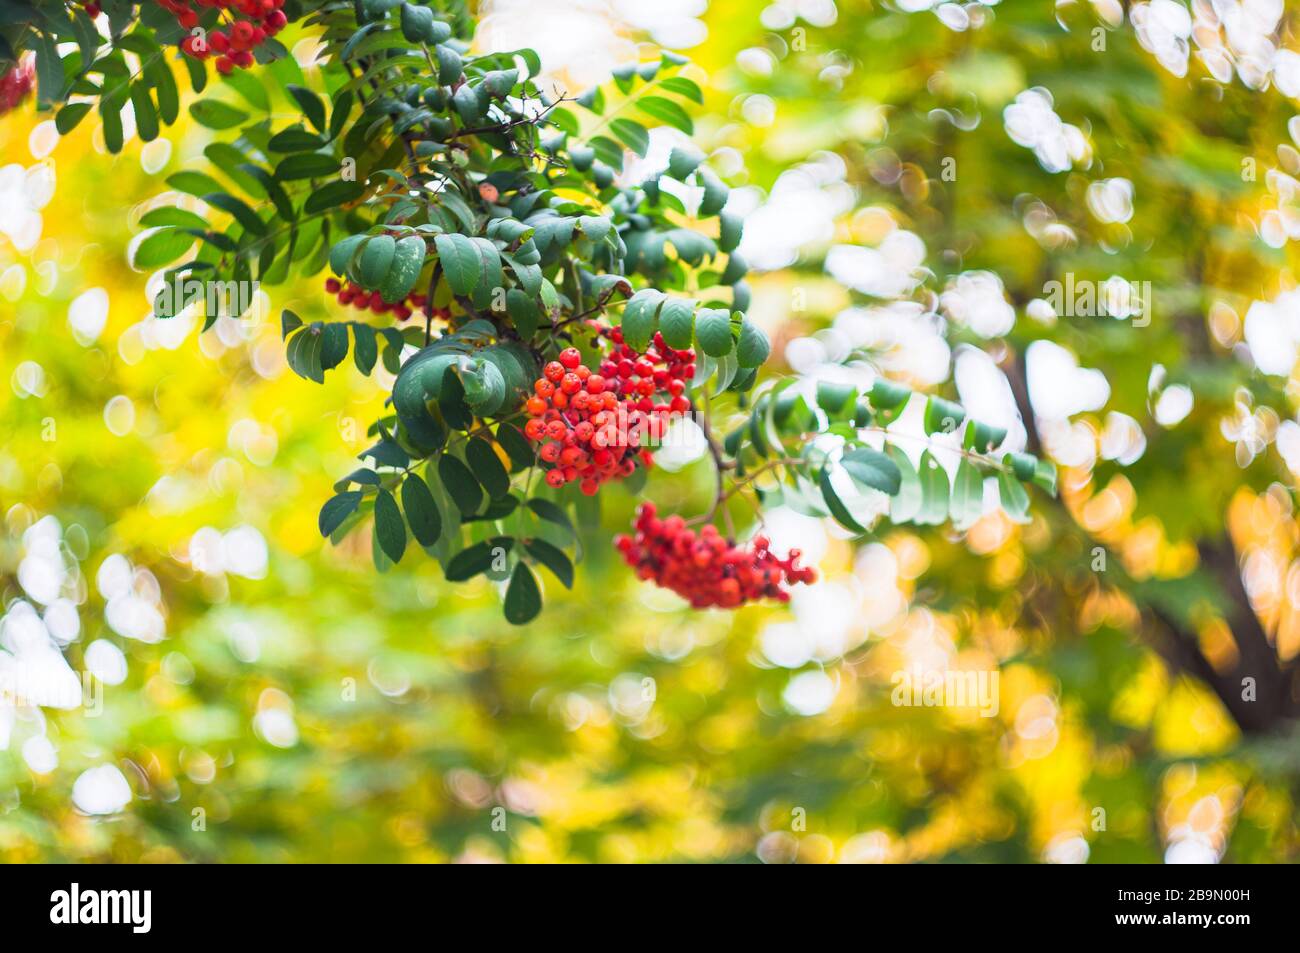 Green branches with bunches of red rowan( Sorbus aucuparia, tree mountain ash) on a blurred background. Autumn colorful background. Copy space. Stock Photo